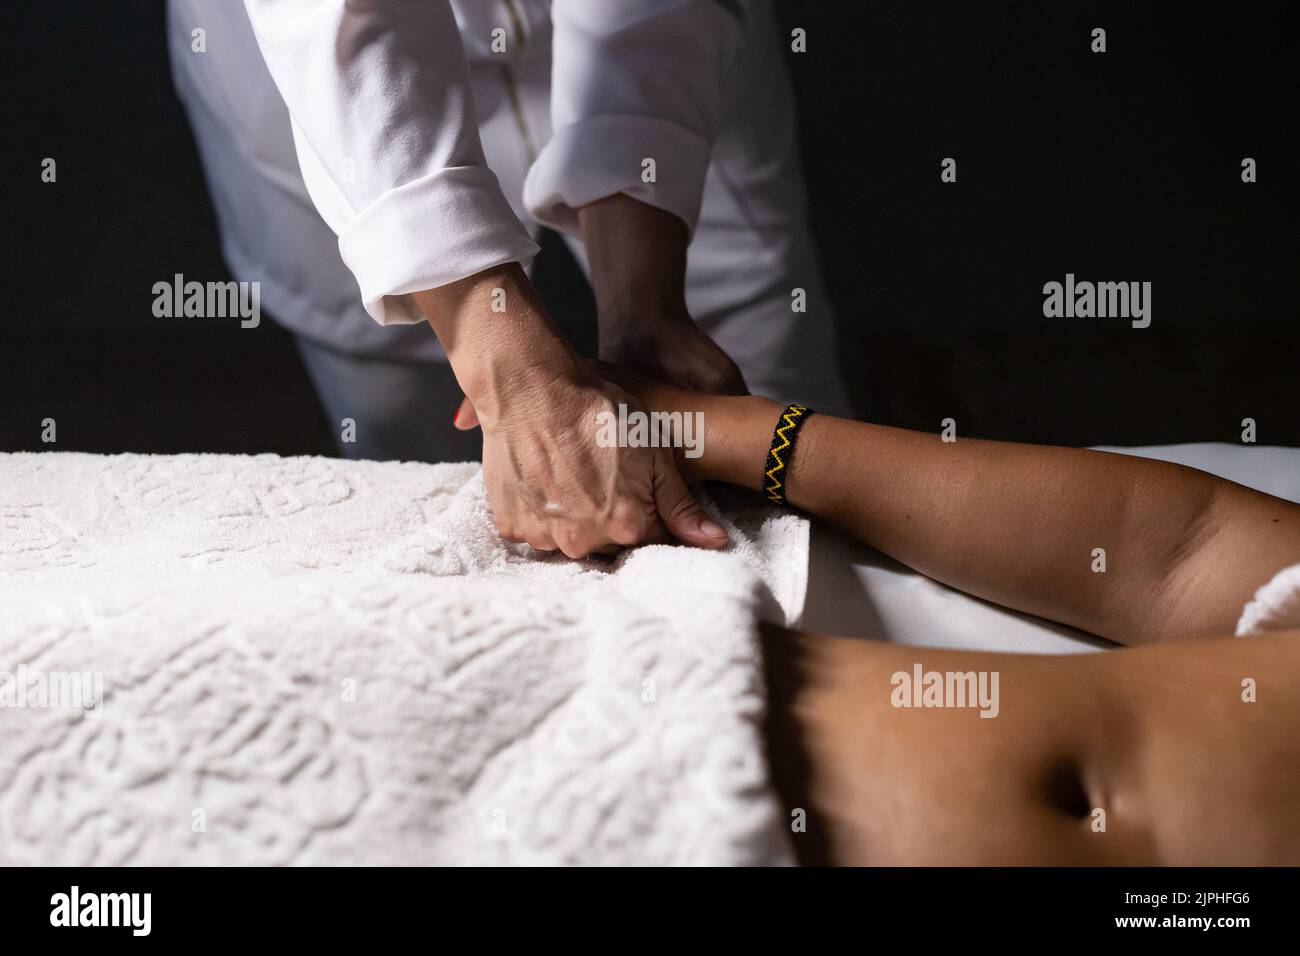 Goiânia, Goias, Brazil – July 18, 2022: Detail of hands of masseur, who is applying therapeutic massage on the hand of a patient who is lying down. Stock Photo